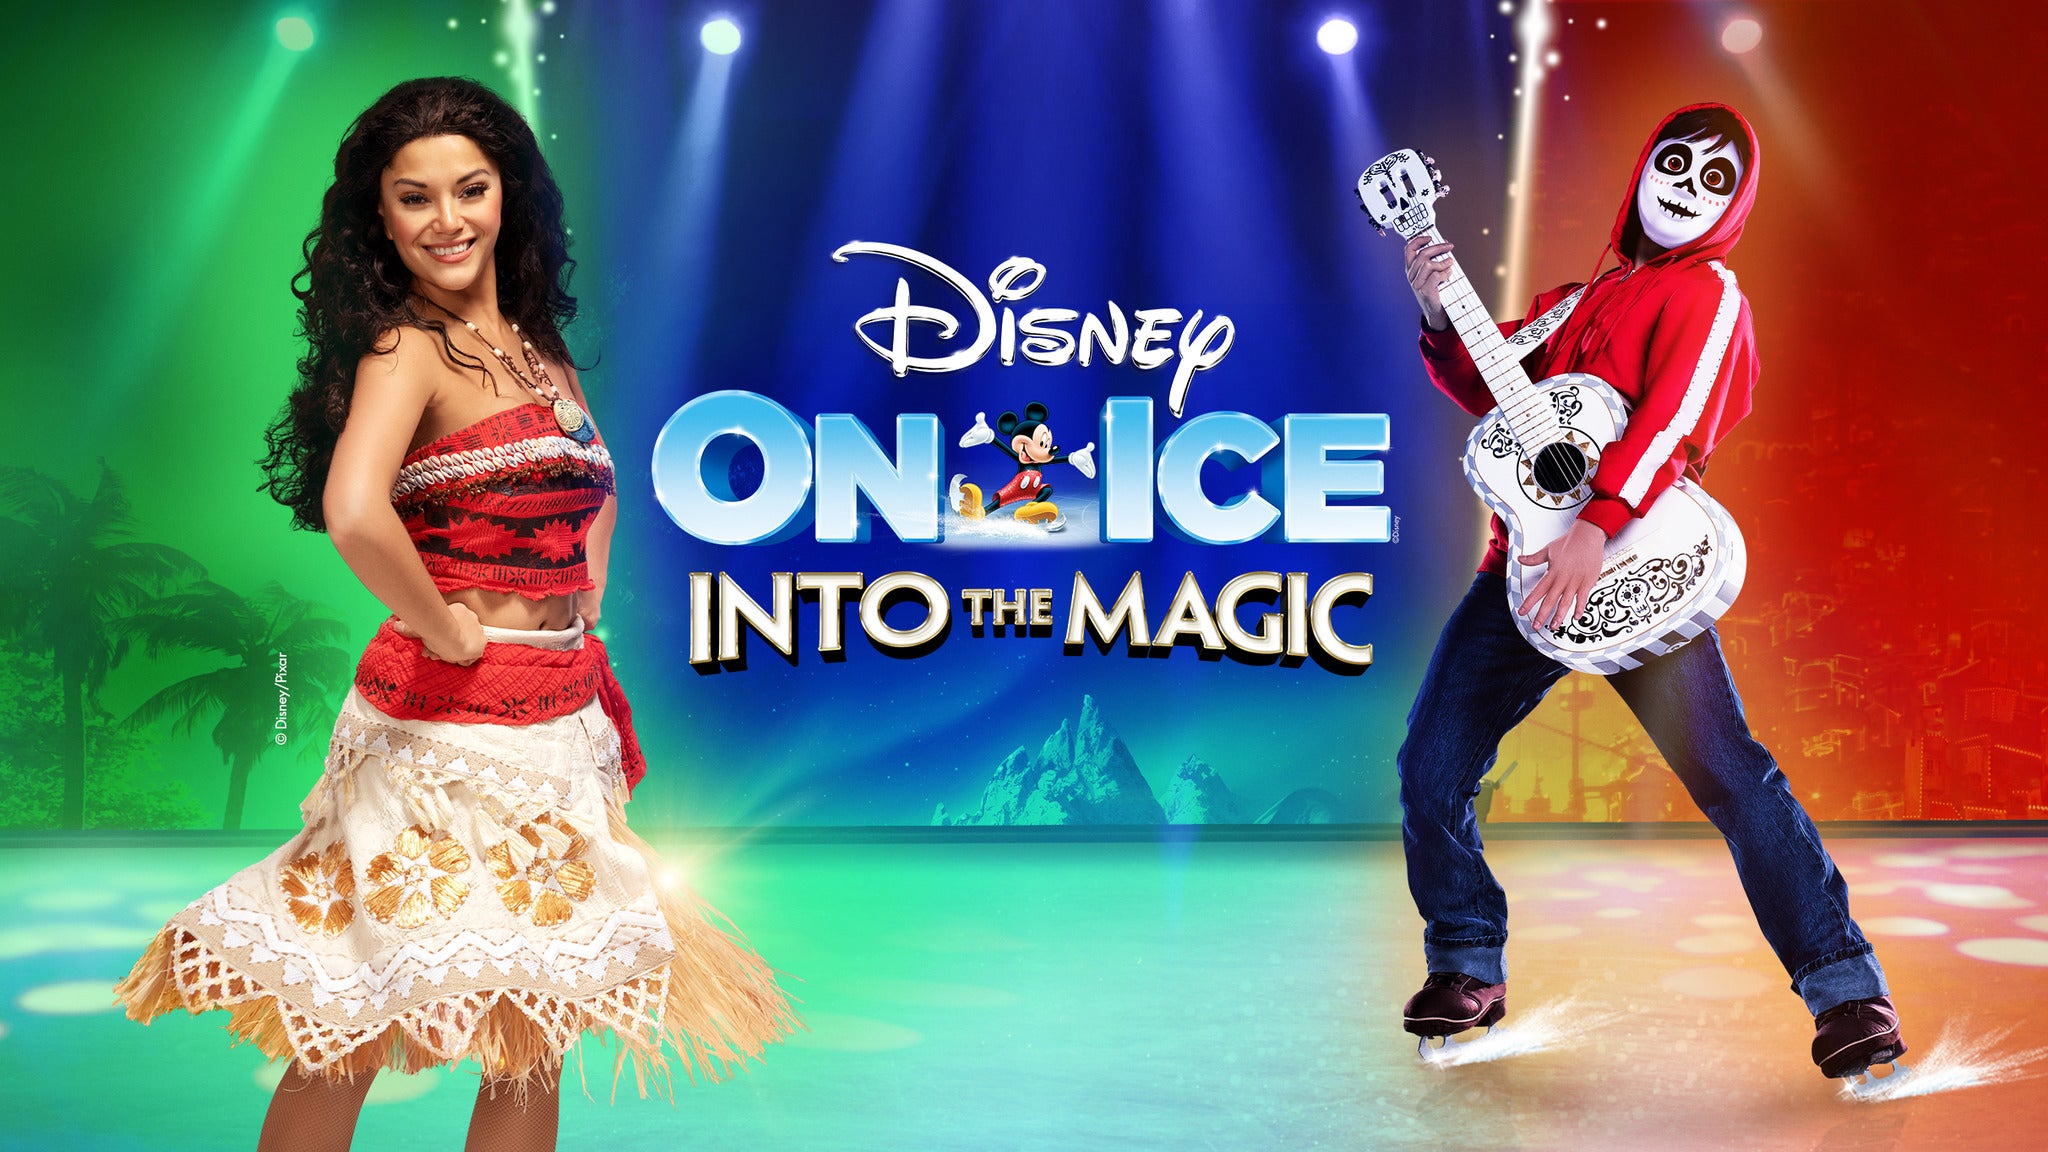 Disney On Ice presents Into the Magic at PPL Center